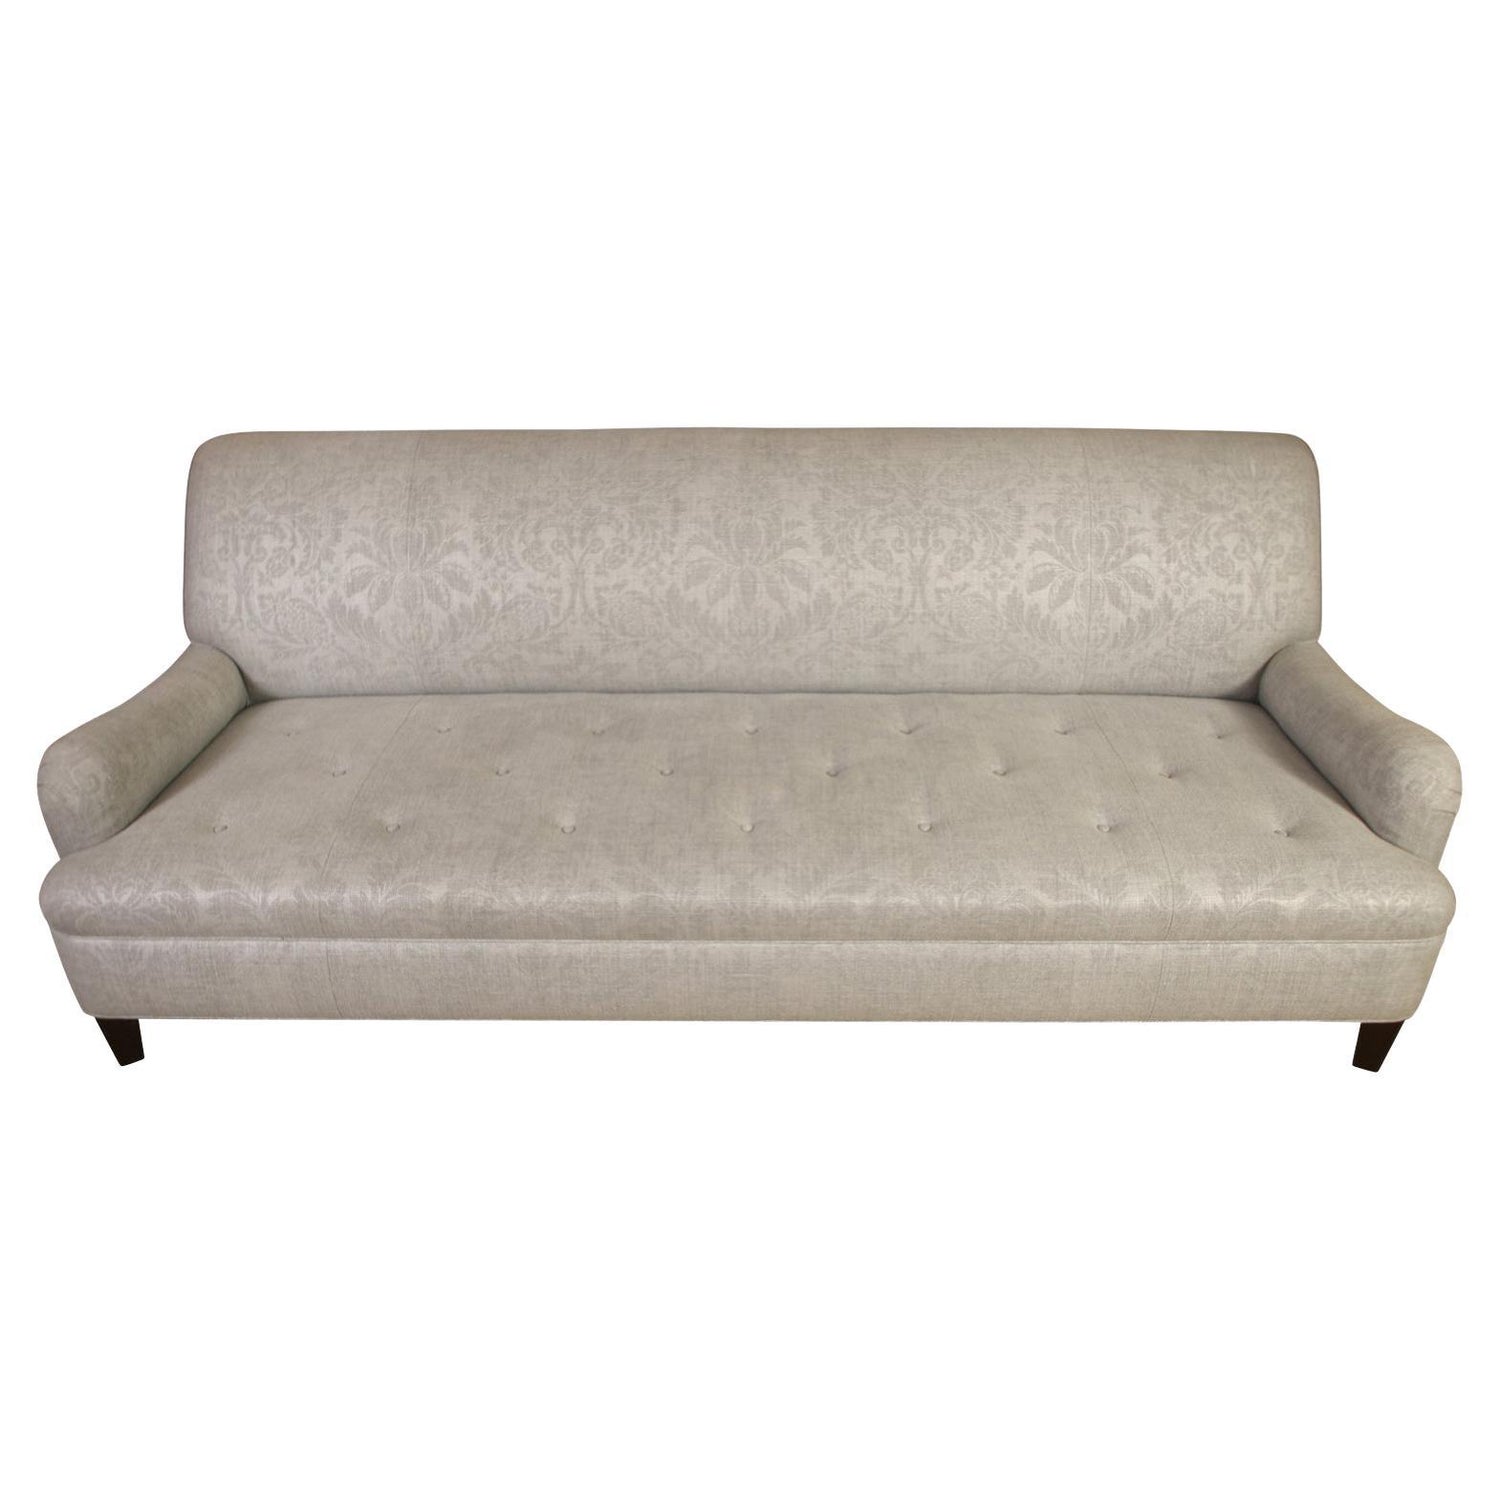 https://a.1stdibscdn.com/silver-jacquard-sofa-with-tufted-seat-for-sale/f_10742/f_303632621662751837842/f_30363262_1662751838266_bg_processed.jpg?width=1500